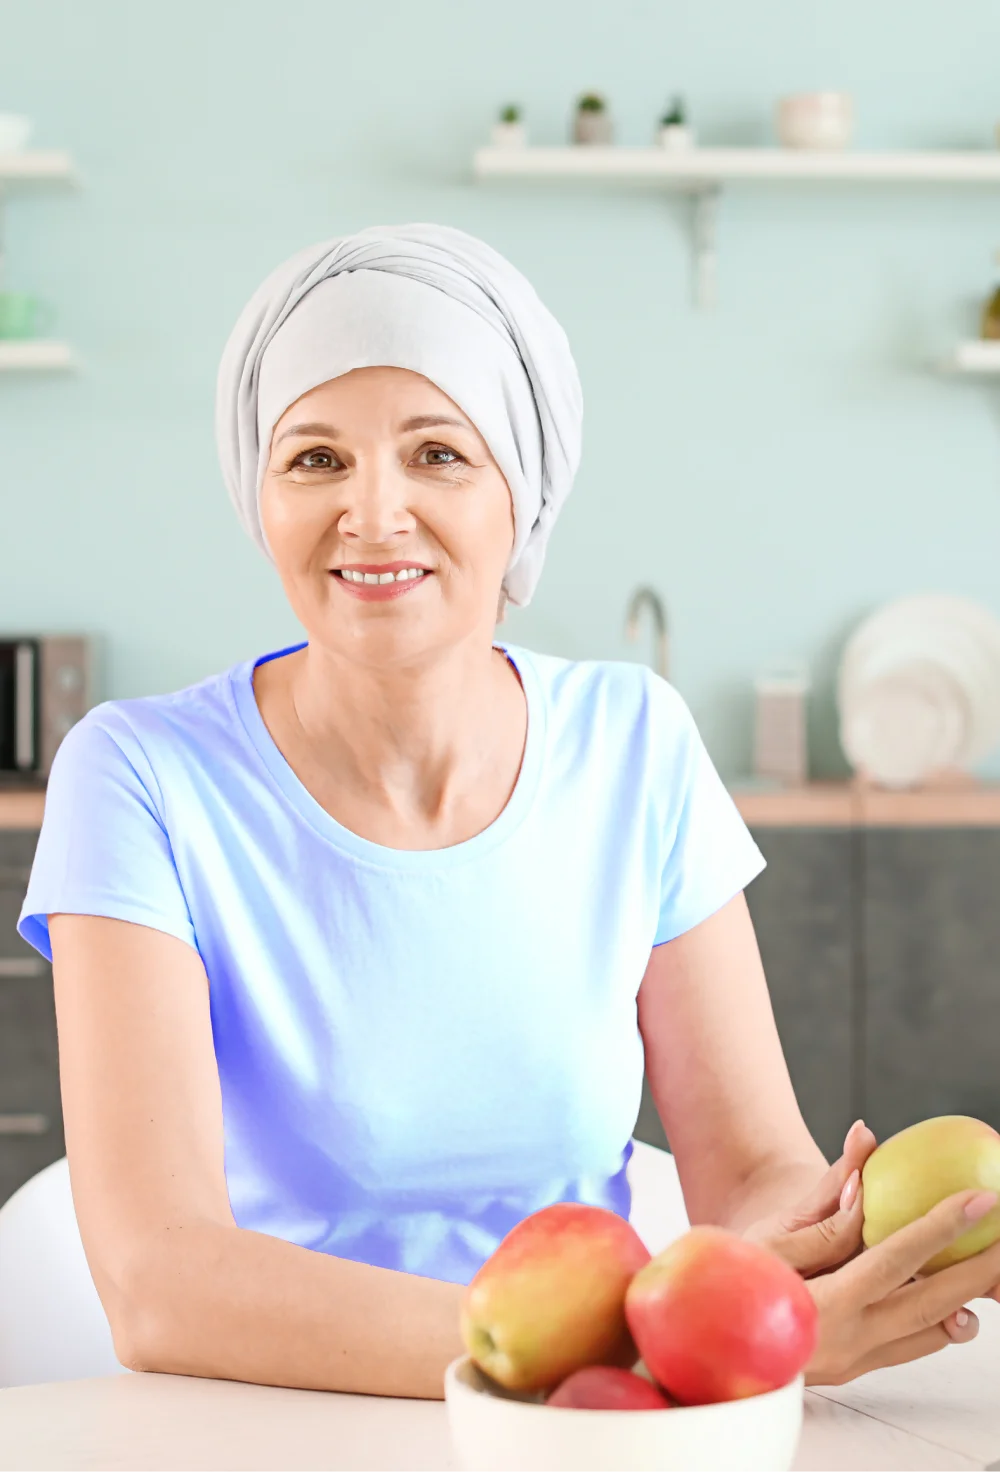 An elderly woman, battling cancer, adheres to a special diet. An oncology nutritionist advises her with care and expertise.